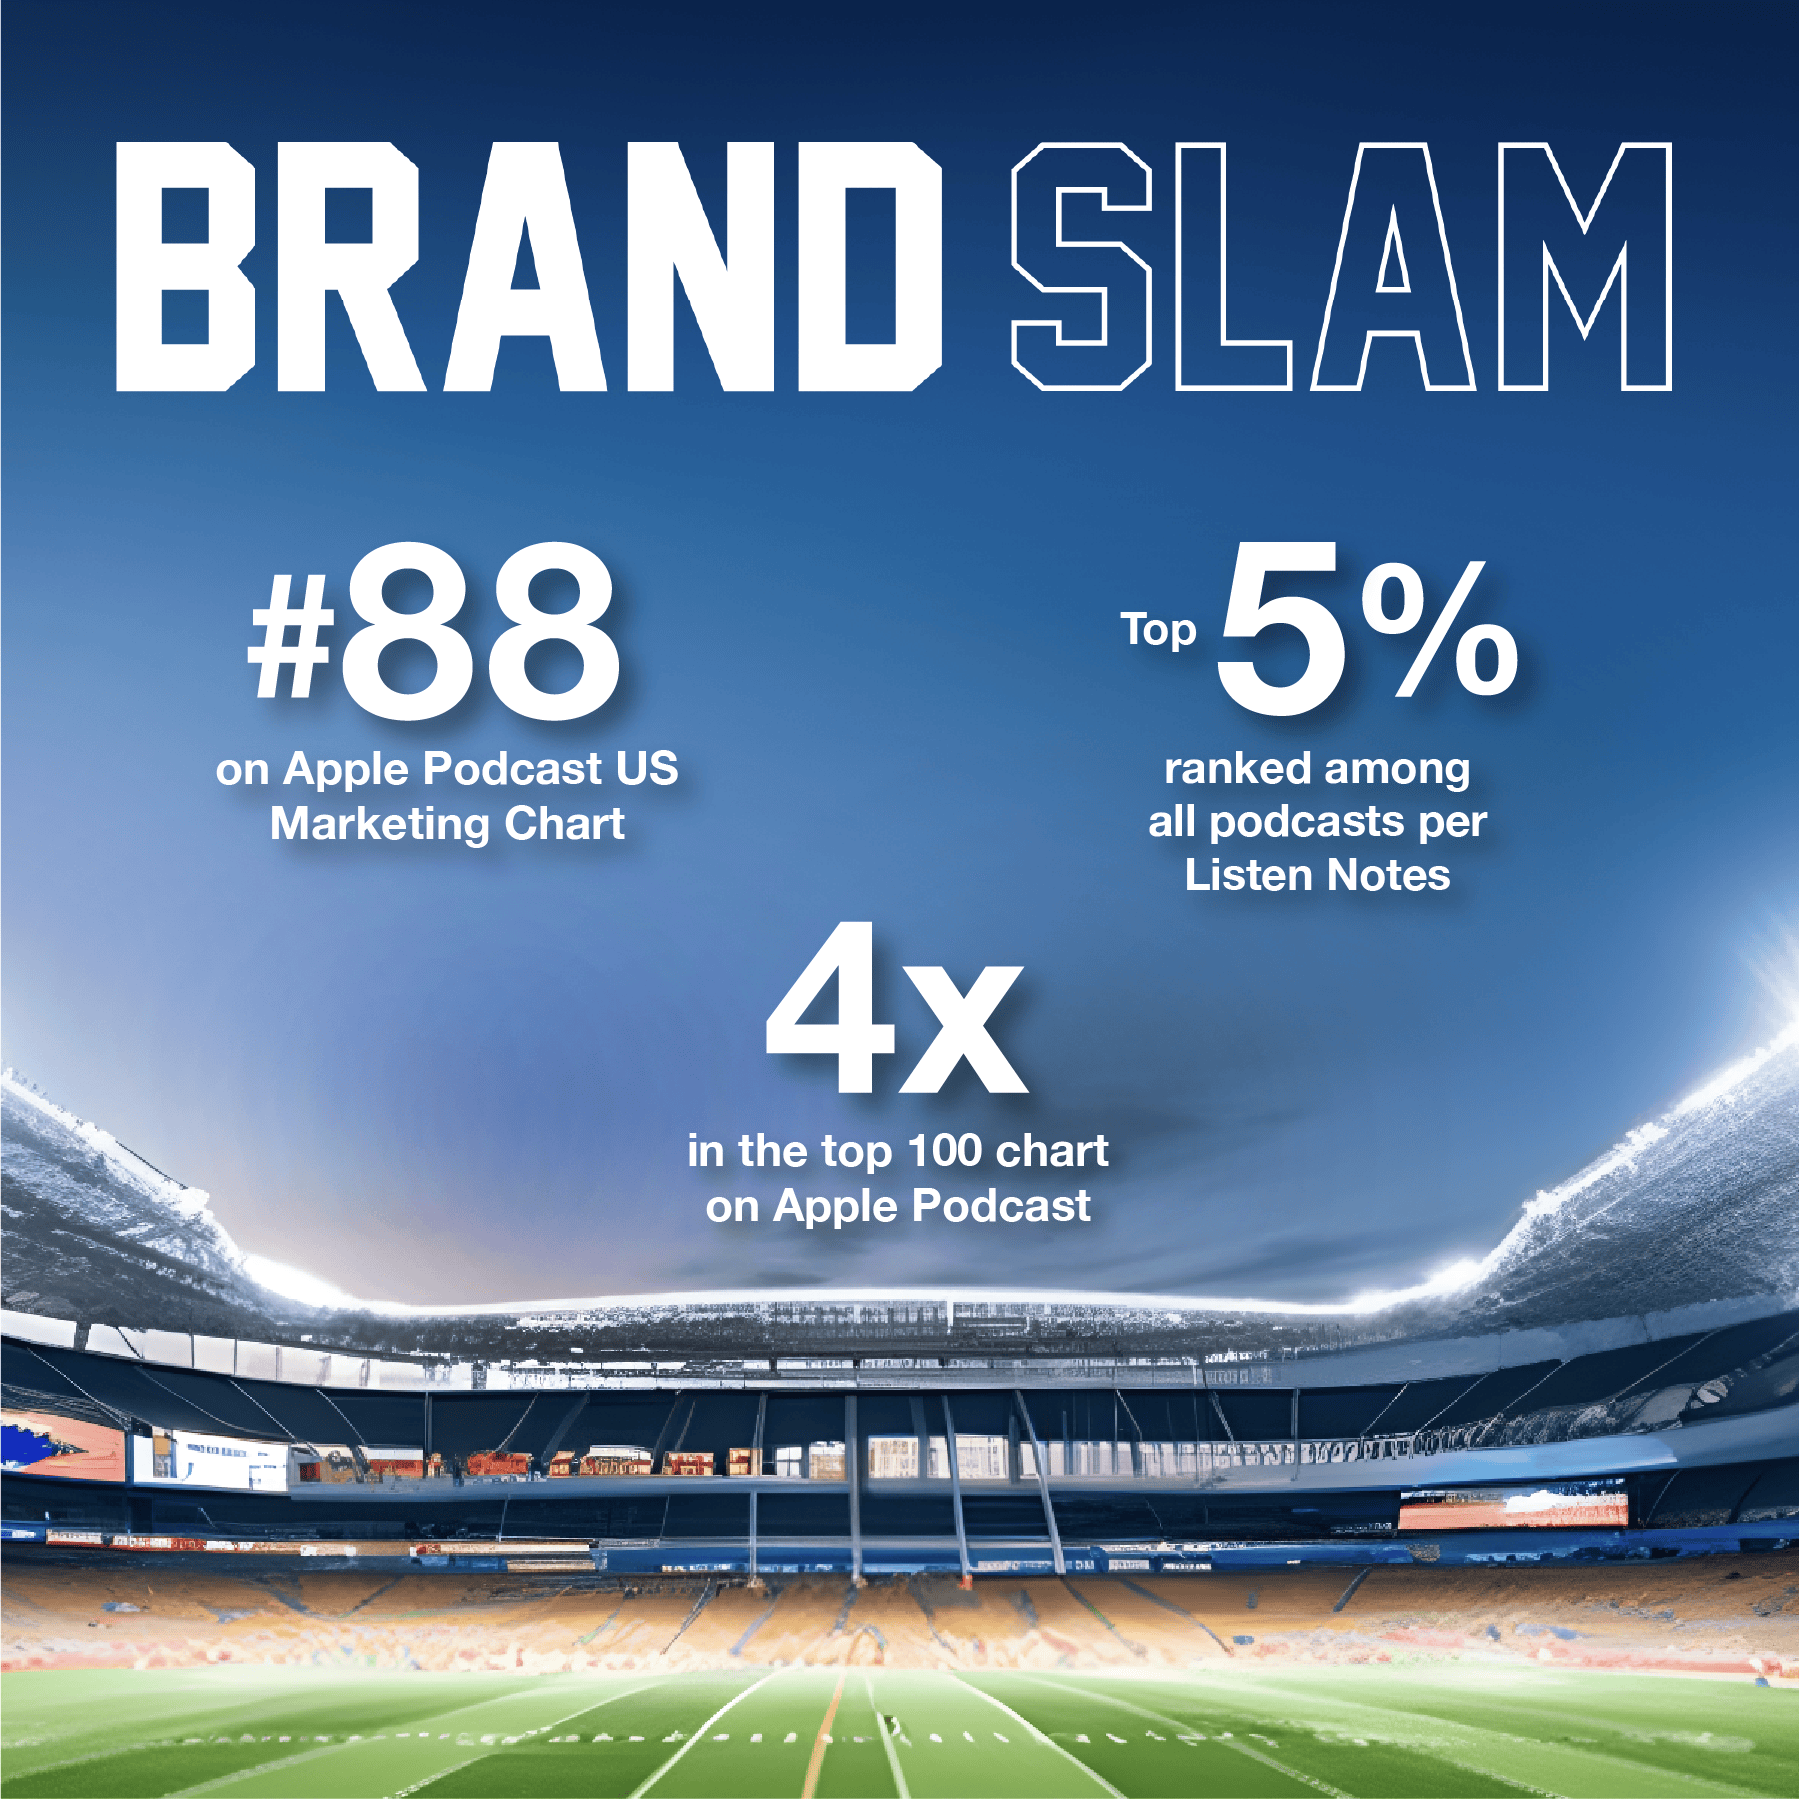 Brand Slam logo and three statistics over the sky with the interior of a sports stadium below the logo and statistics. The statistics read #88 on Apple Podcast US Marketing Chart, Top 5% ranked among all podcasts per Listen Notes, and 4x in the top 100 chart on Apple Podcast.